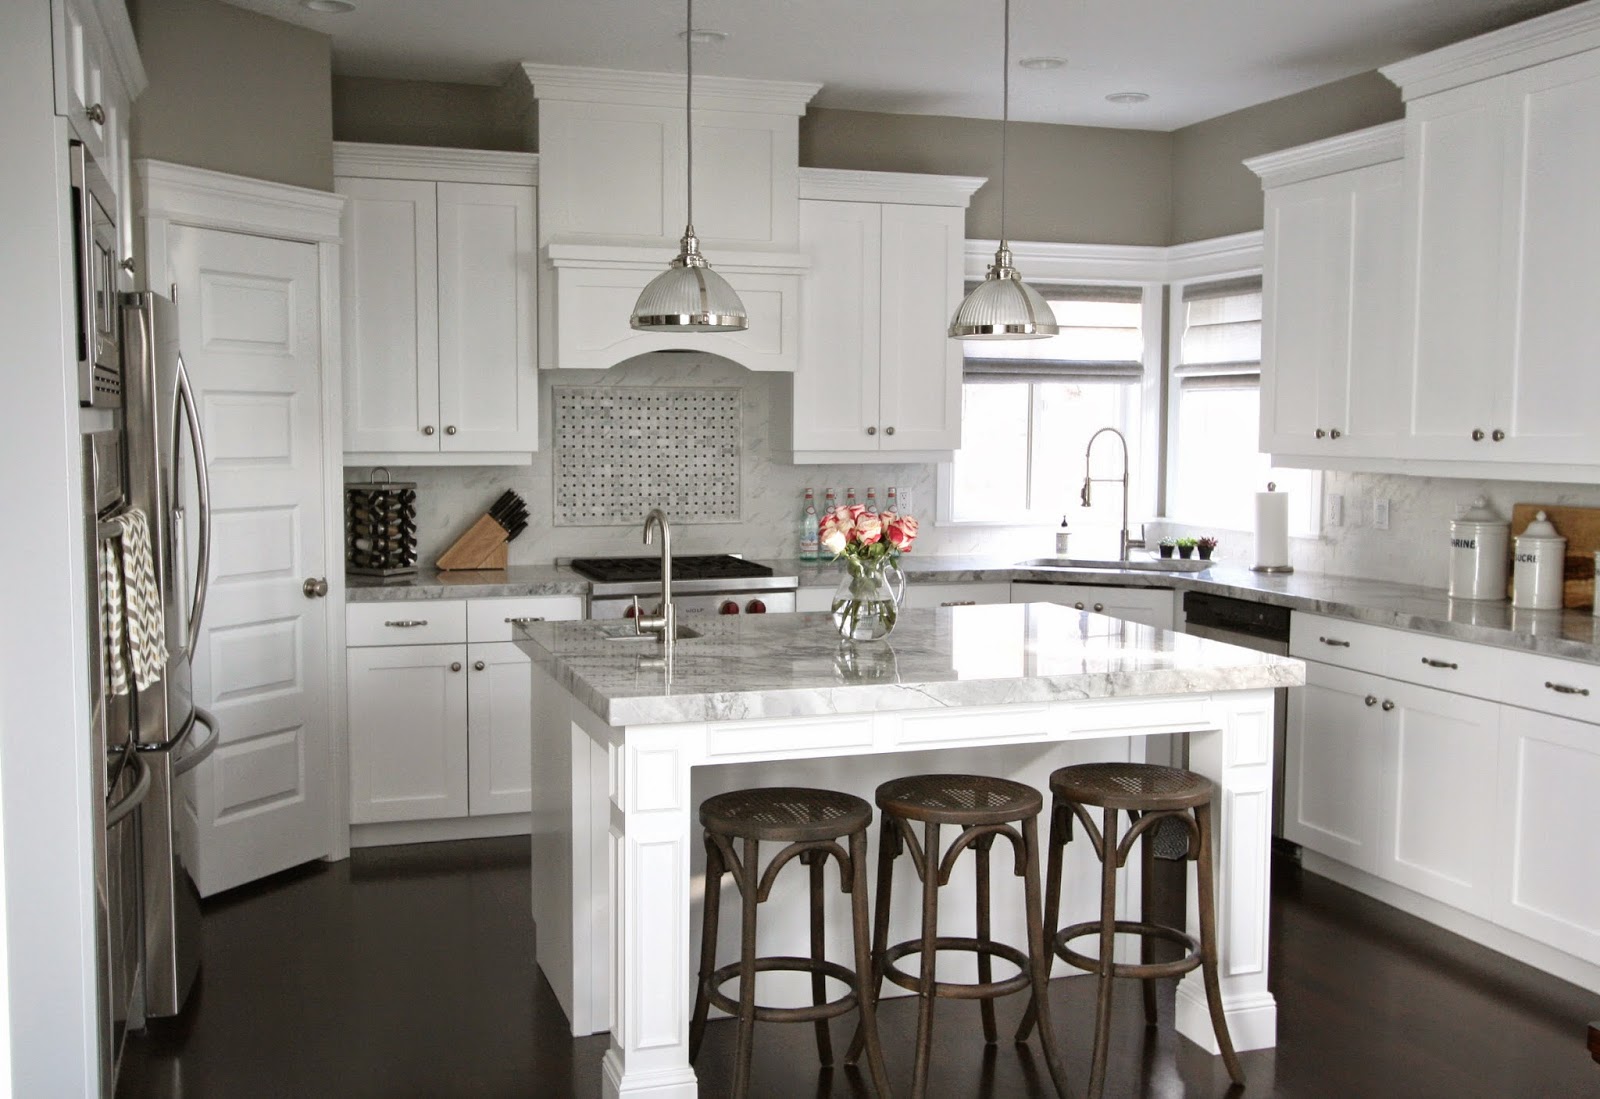 Design, Life, and Style: Kitchen Remodel